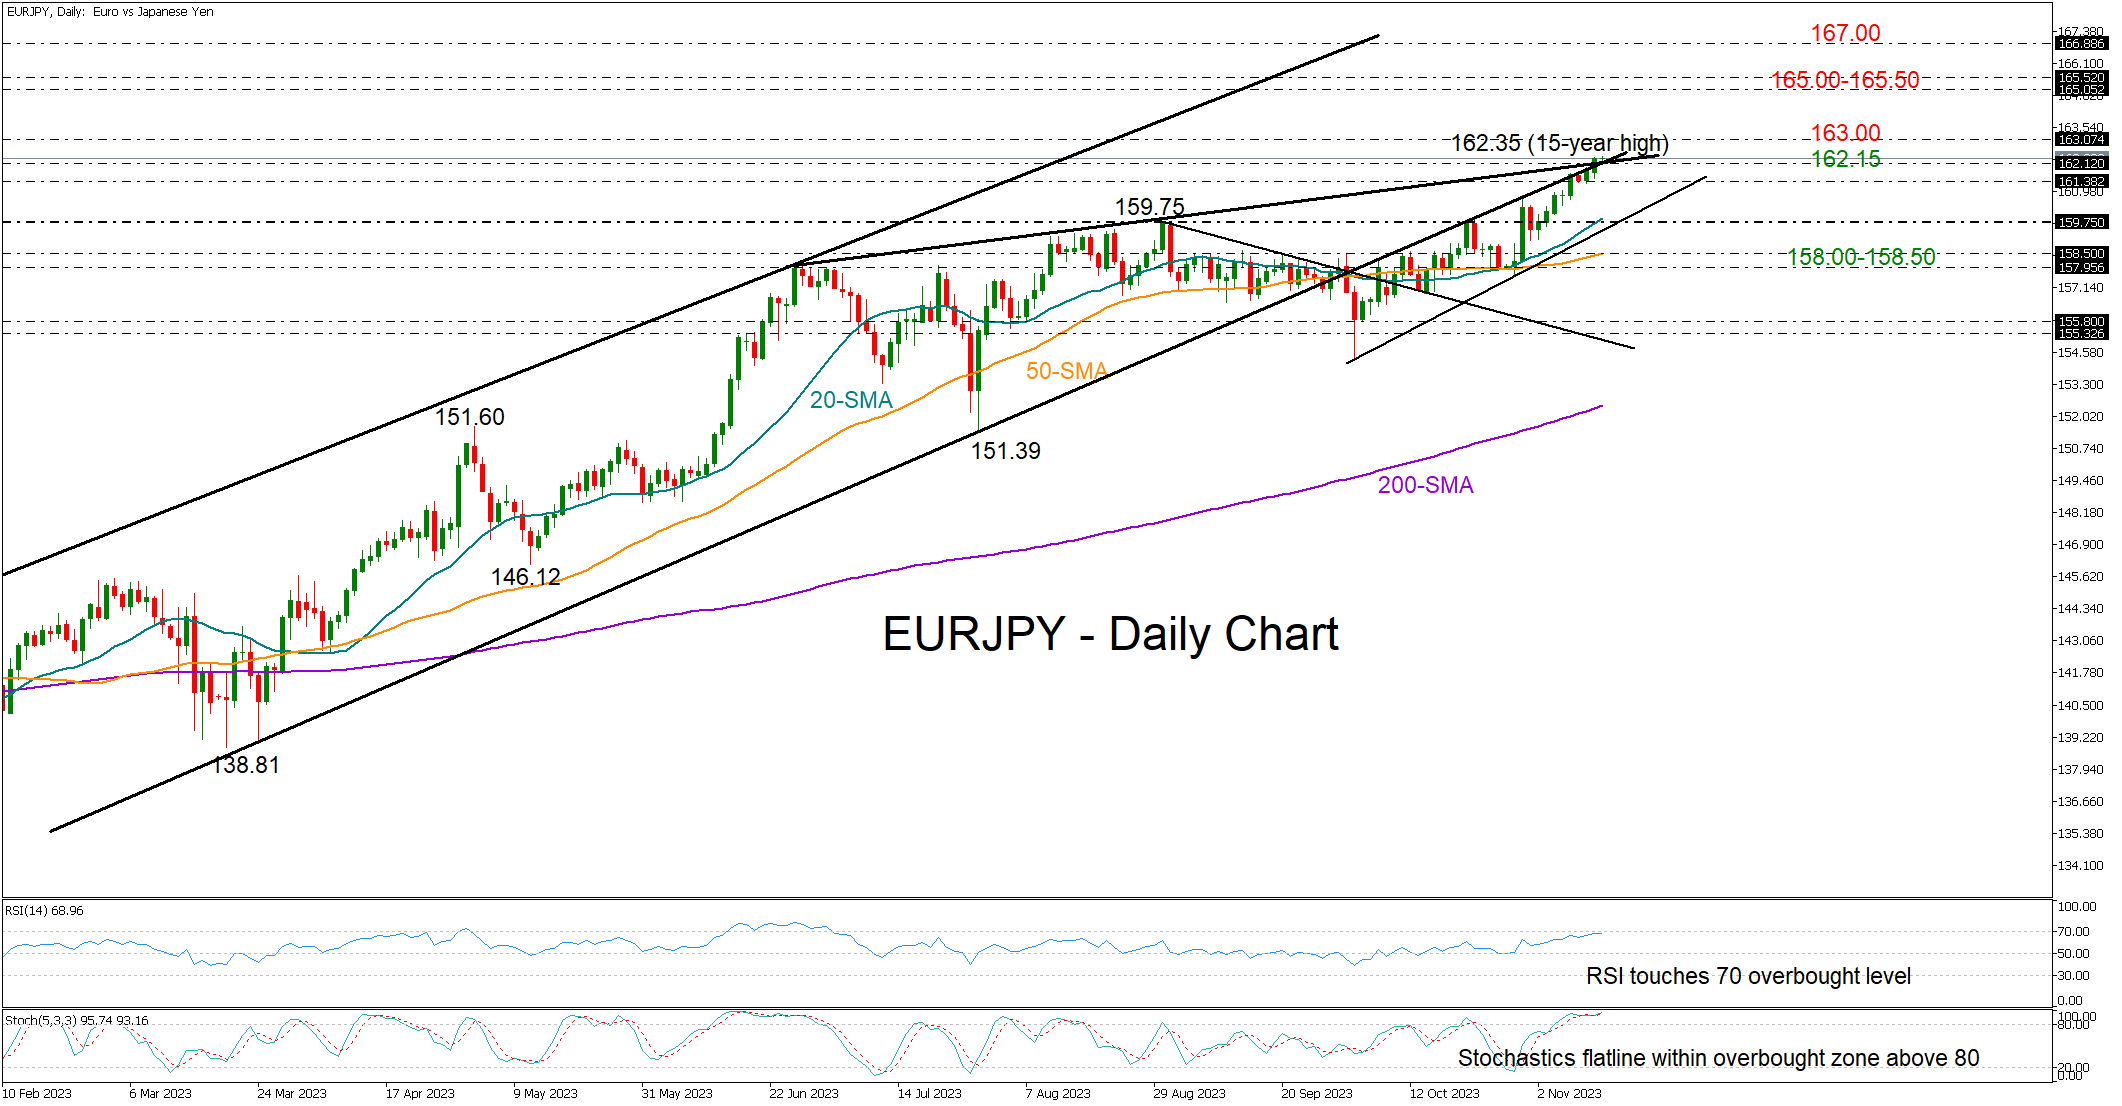 EURJPY's Ascending Trajectory: Balancing Highs with Emerging Risks